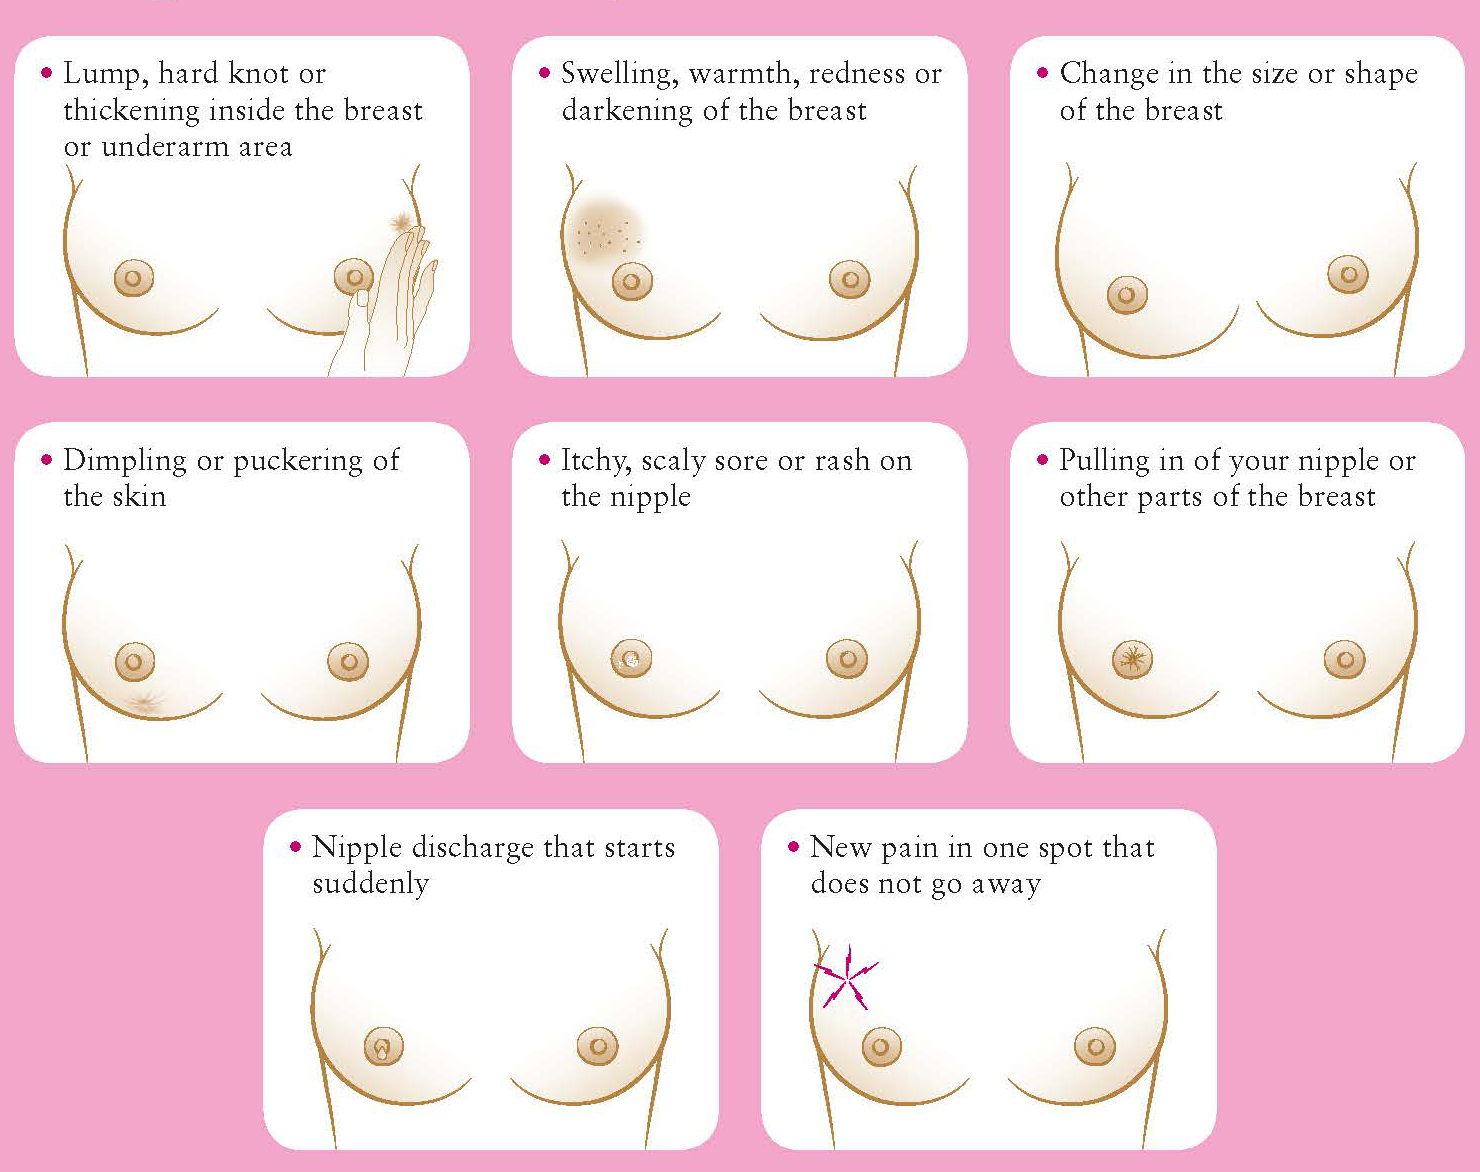 Benign Conditions Of The Breast